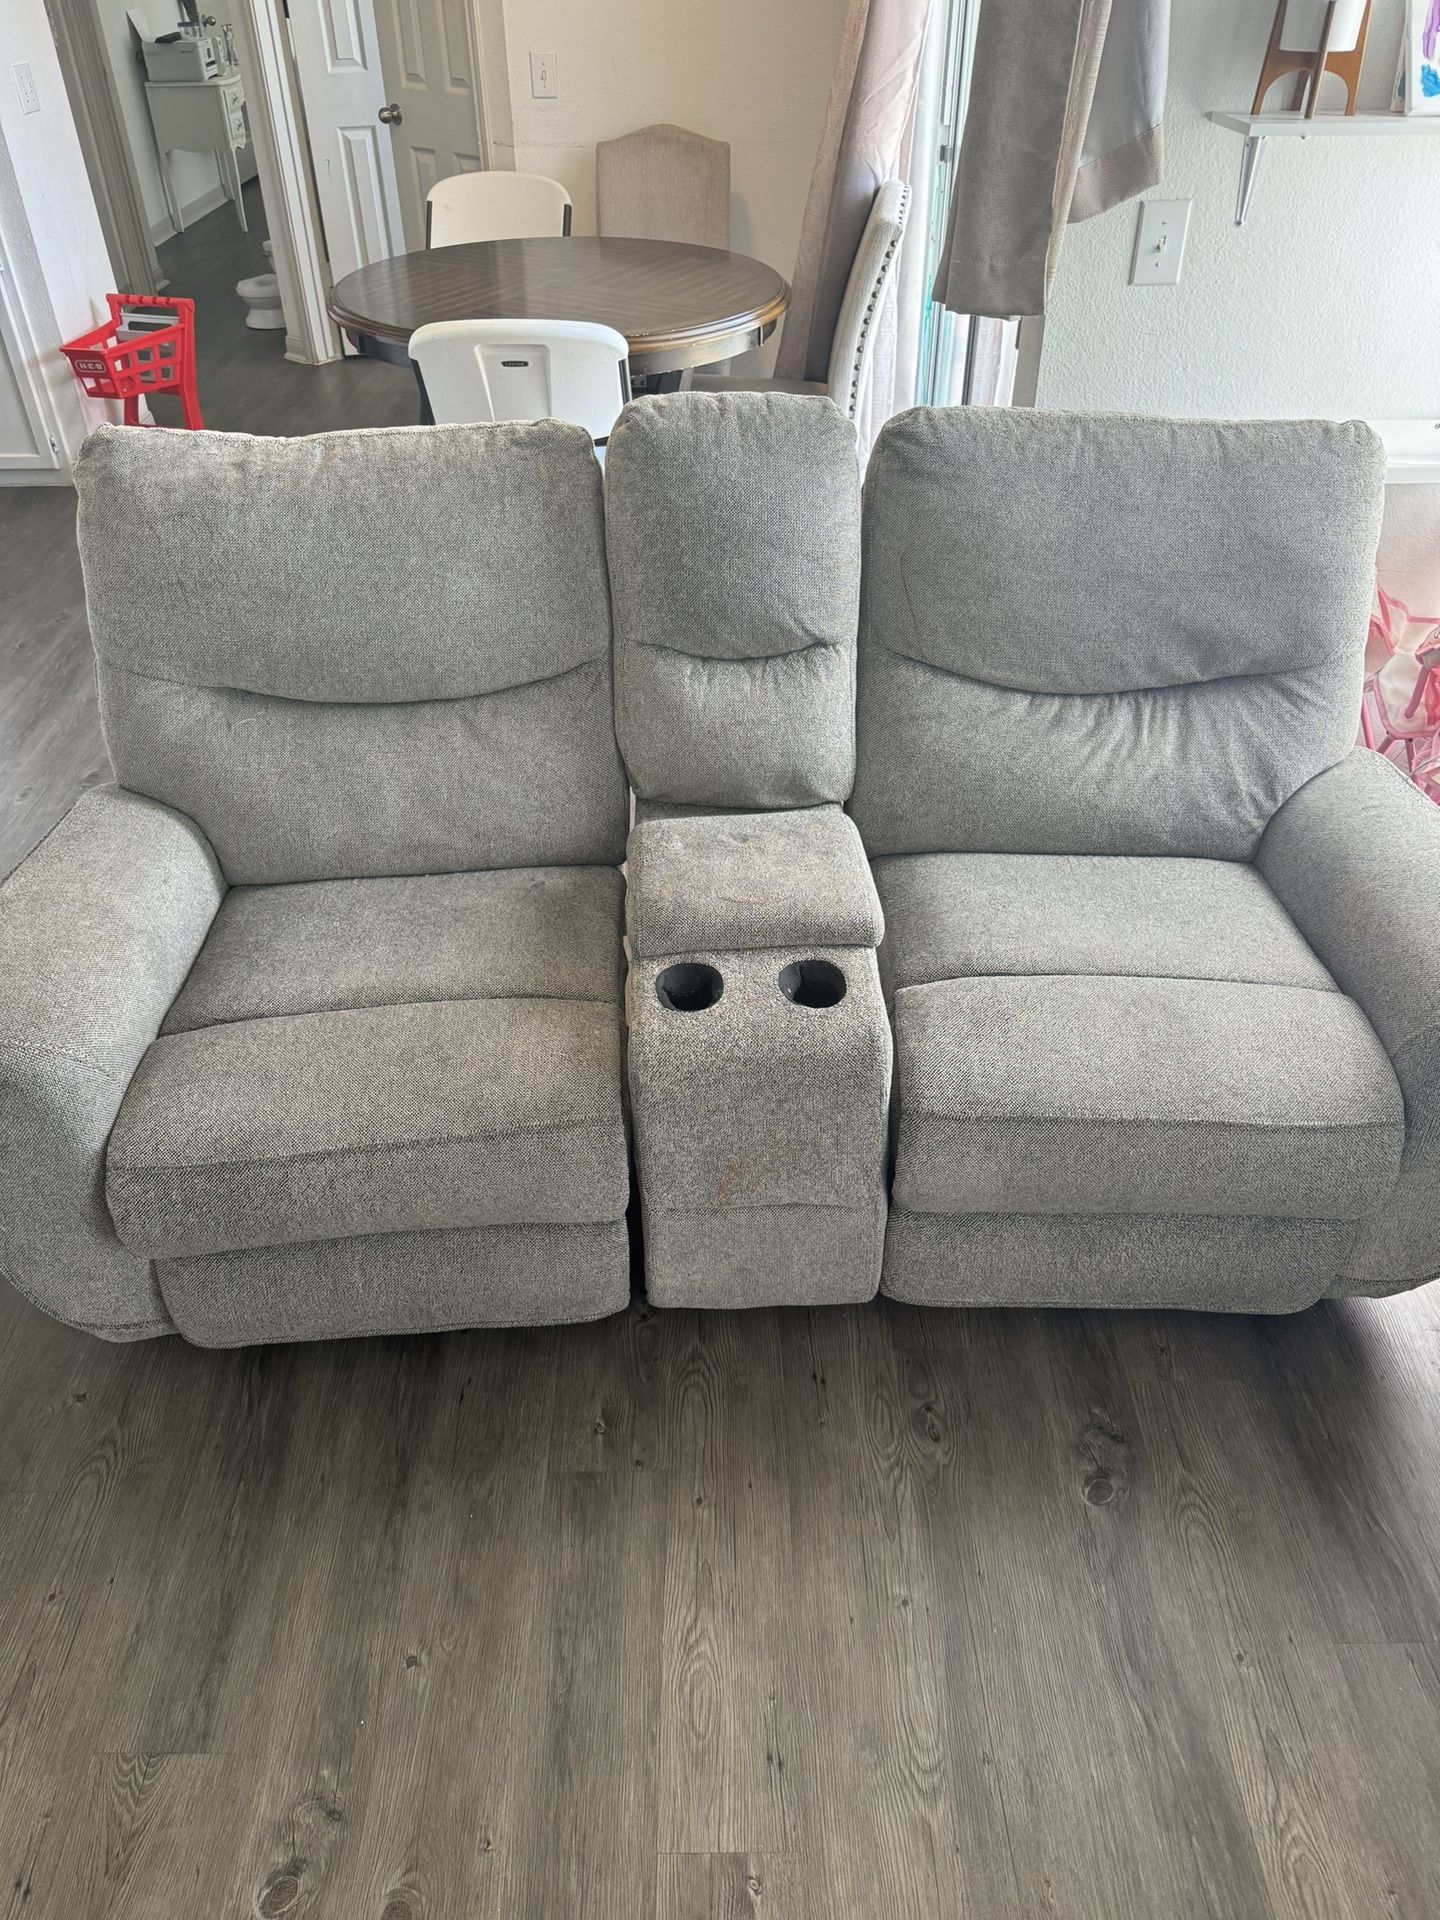 Couch And Double Recliner With Area Rug